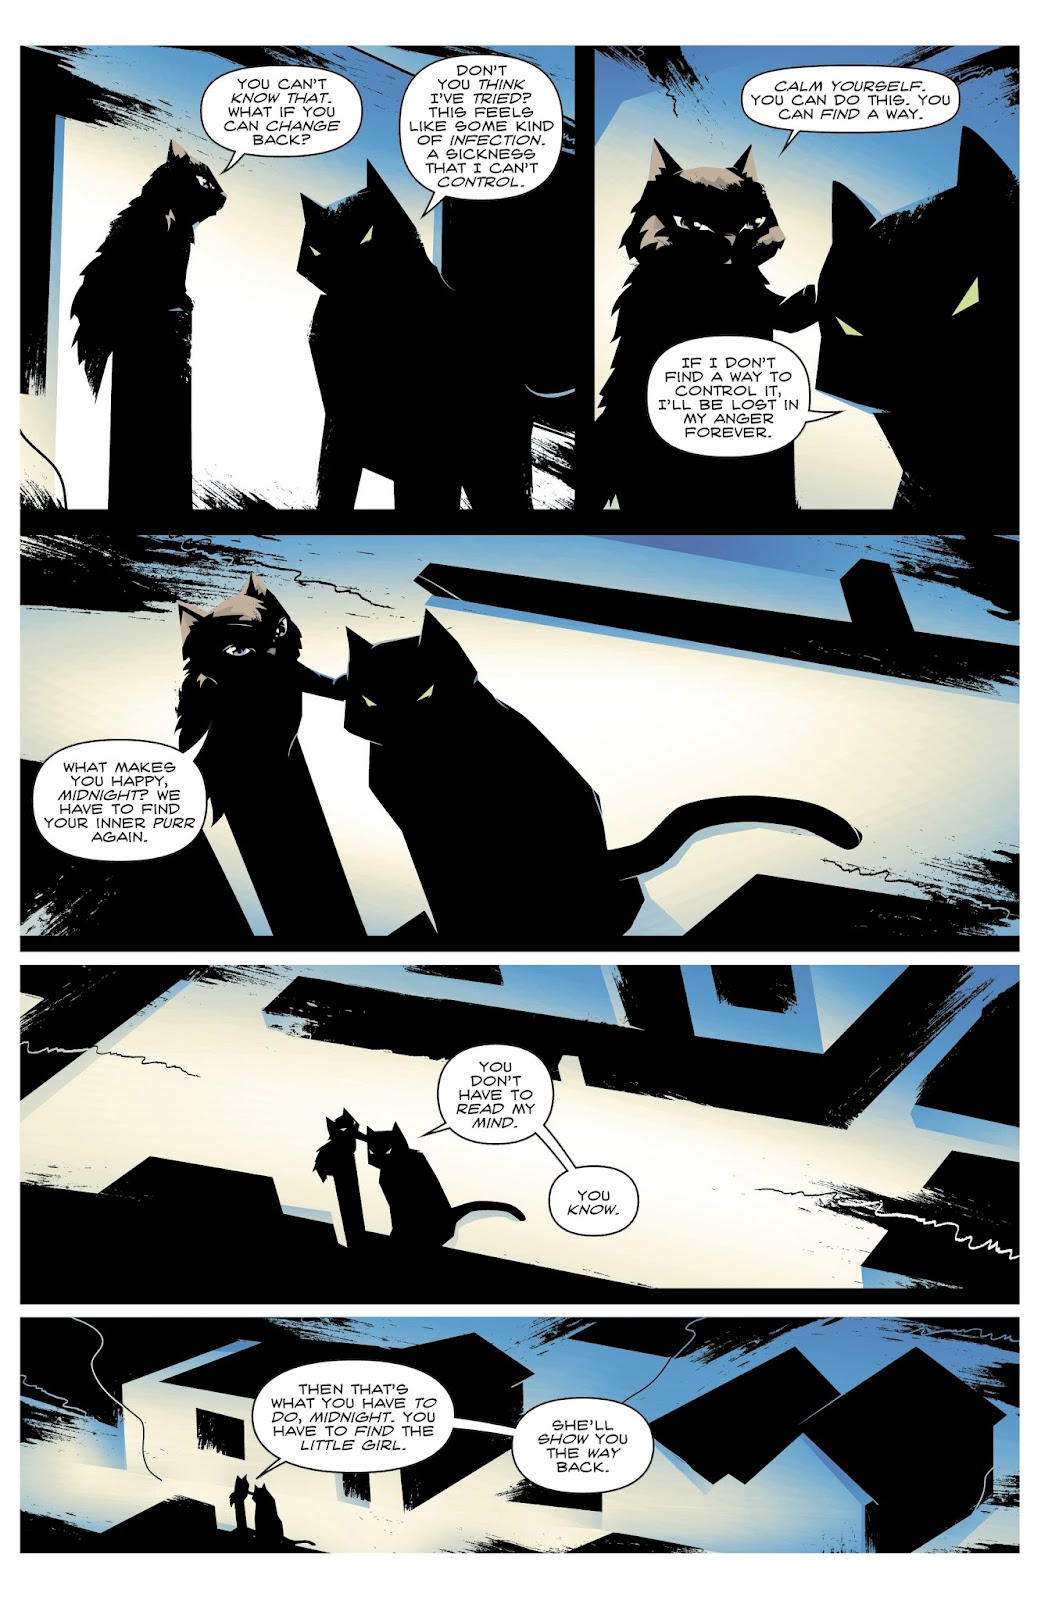 Hero Cats: Midnight Over Stellar City Vol. 2 issue 3 - Page 13